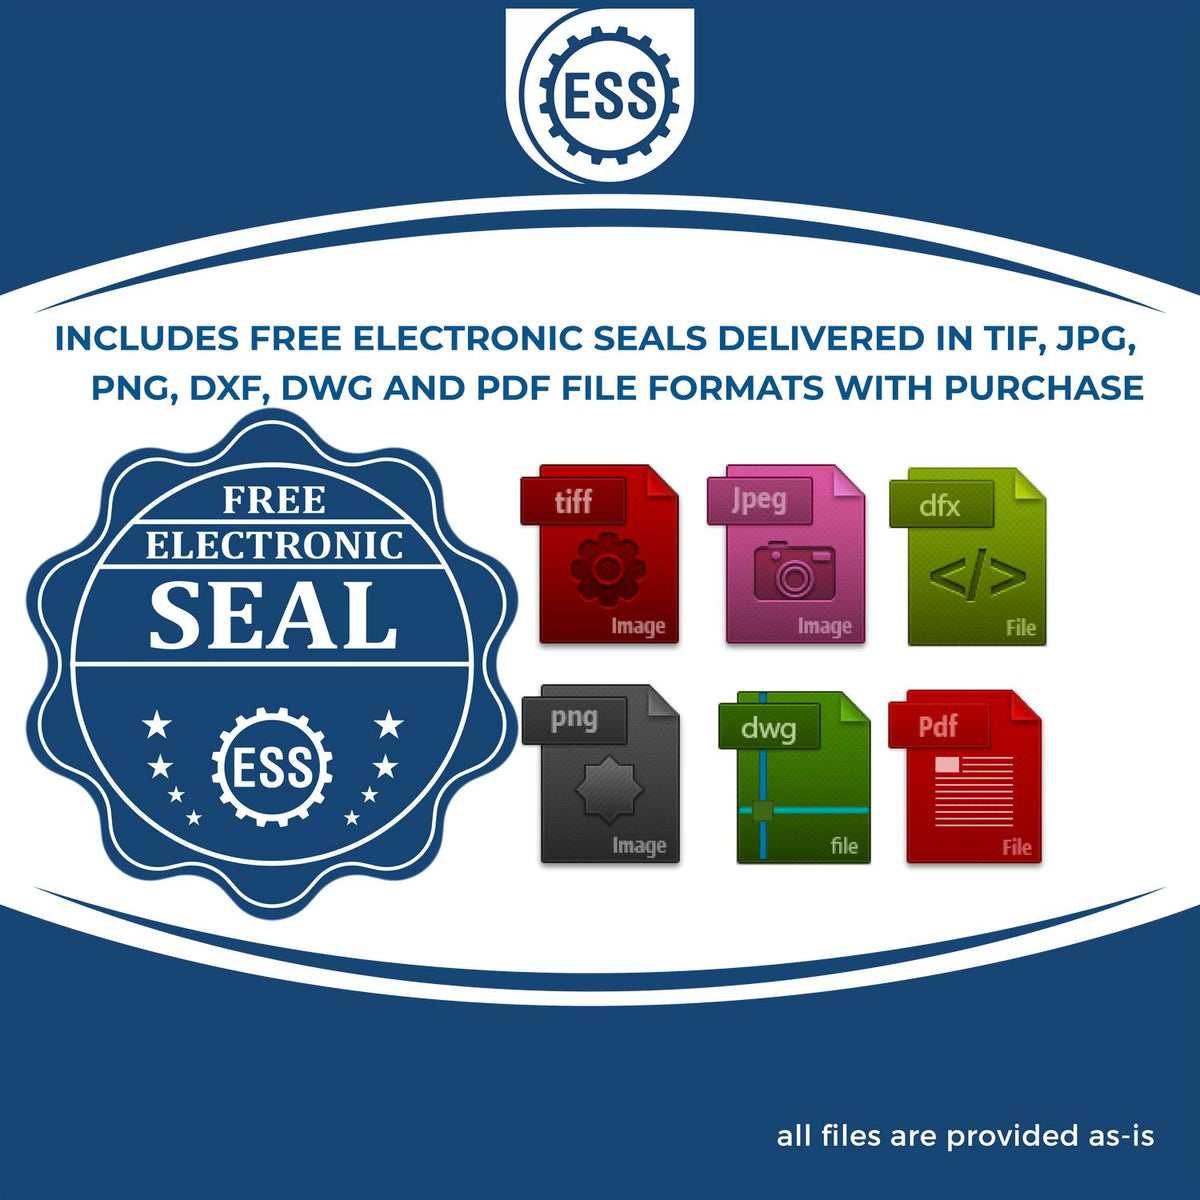 An infographic for the free electronic seal for the Hawaii Geologist Desk Seal illustrating the different file type icons such as DXF, DWG, TIF, JPG and PNG.